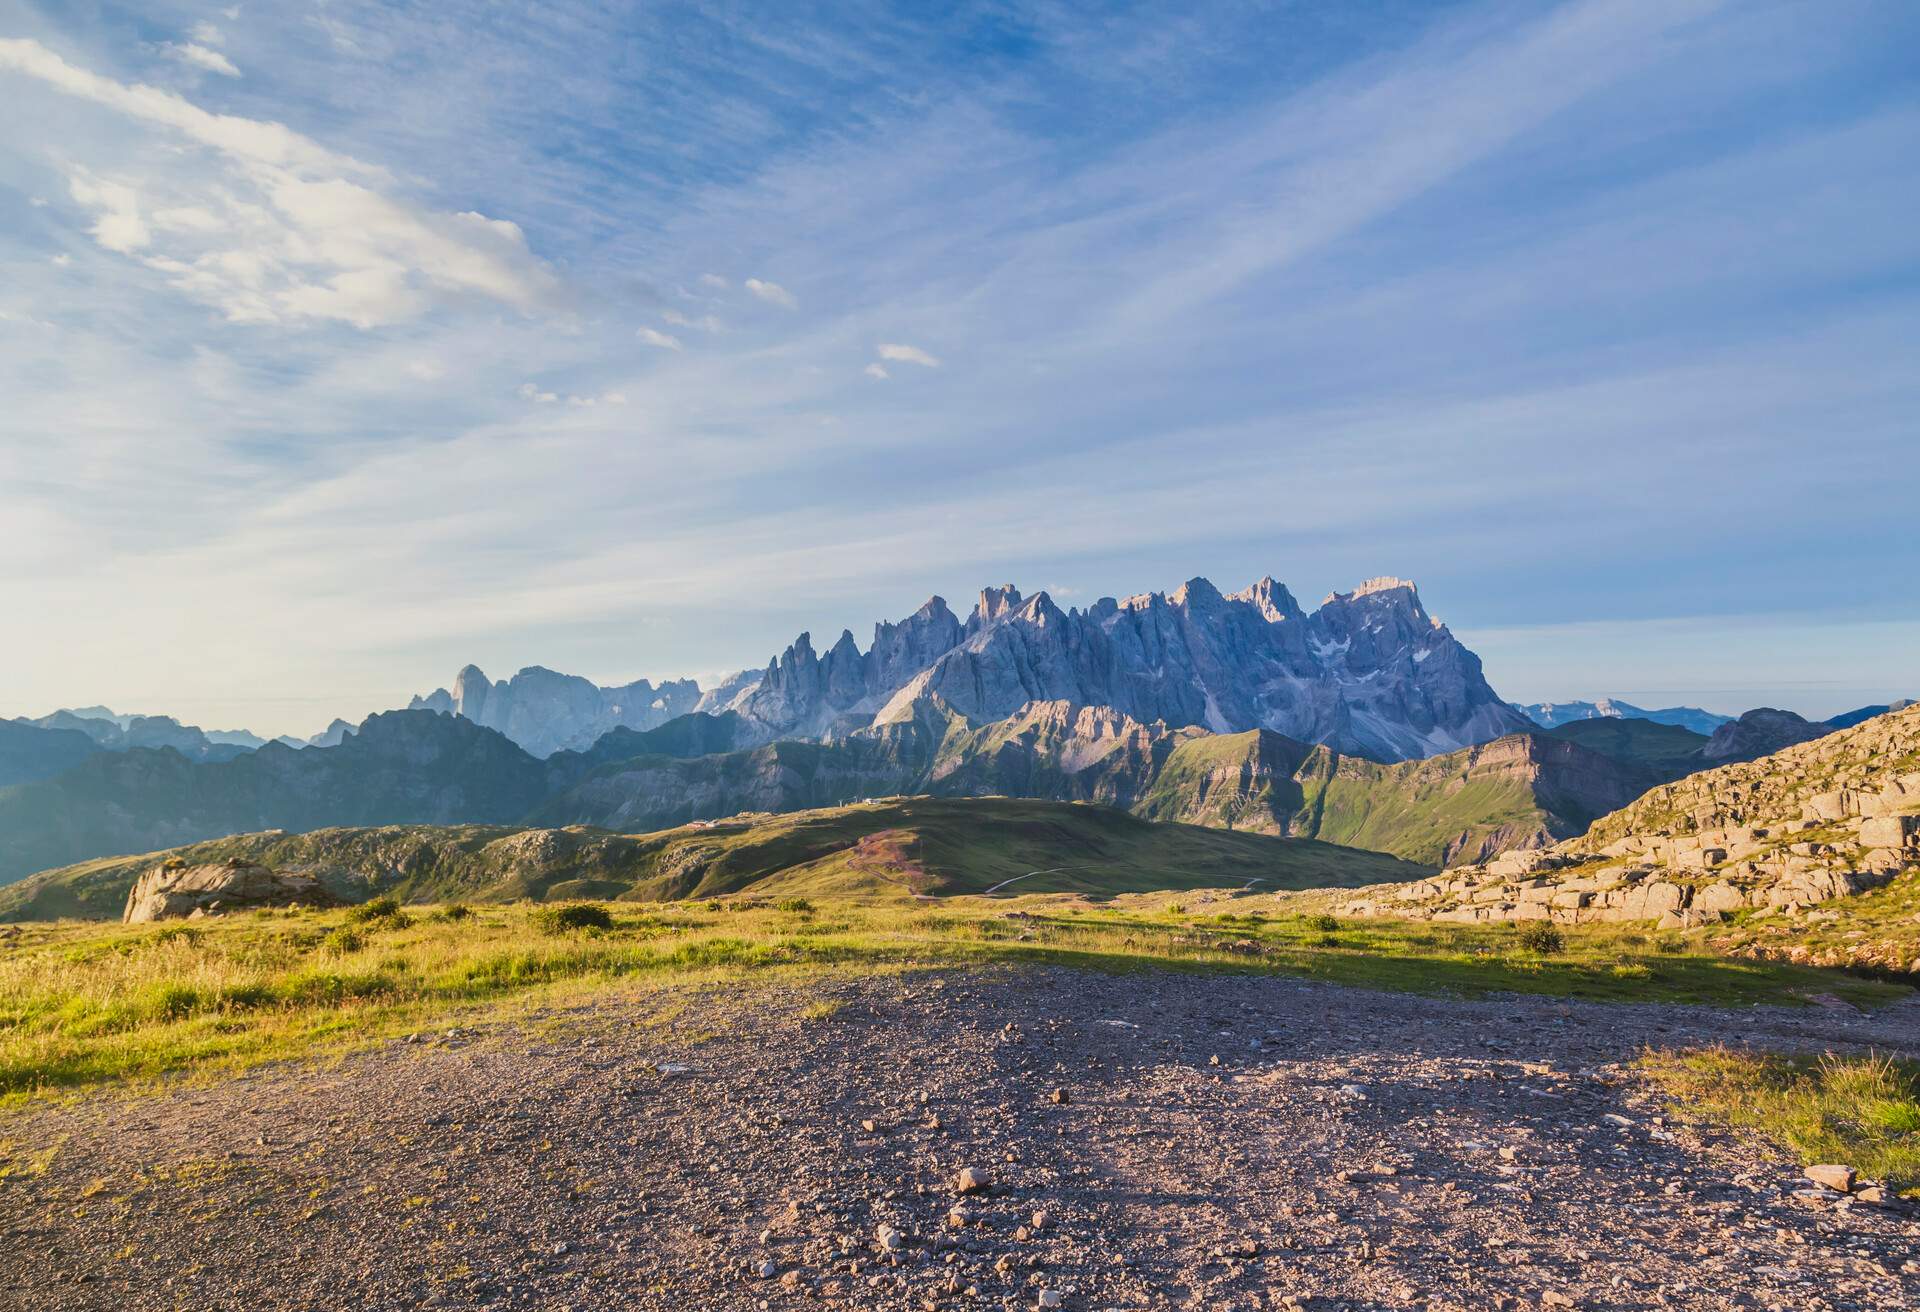 Scenics of the Dolomites mountains in the early morning; seen from Moena, Trento province, Italy.